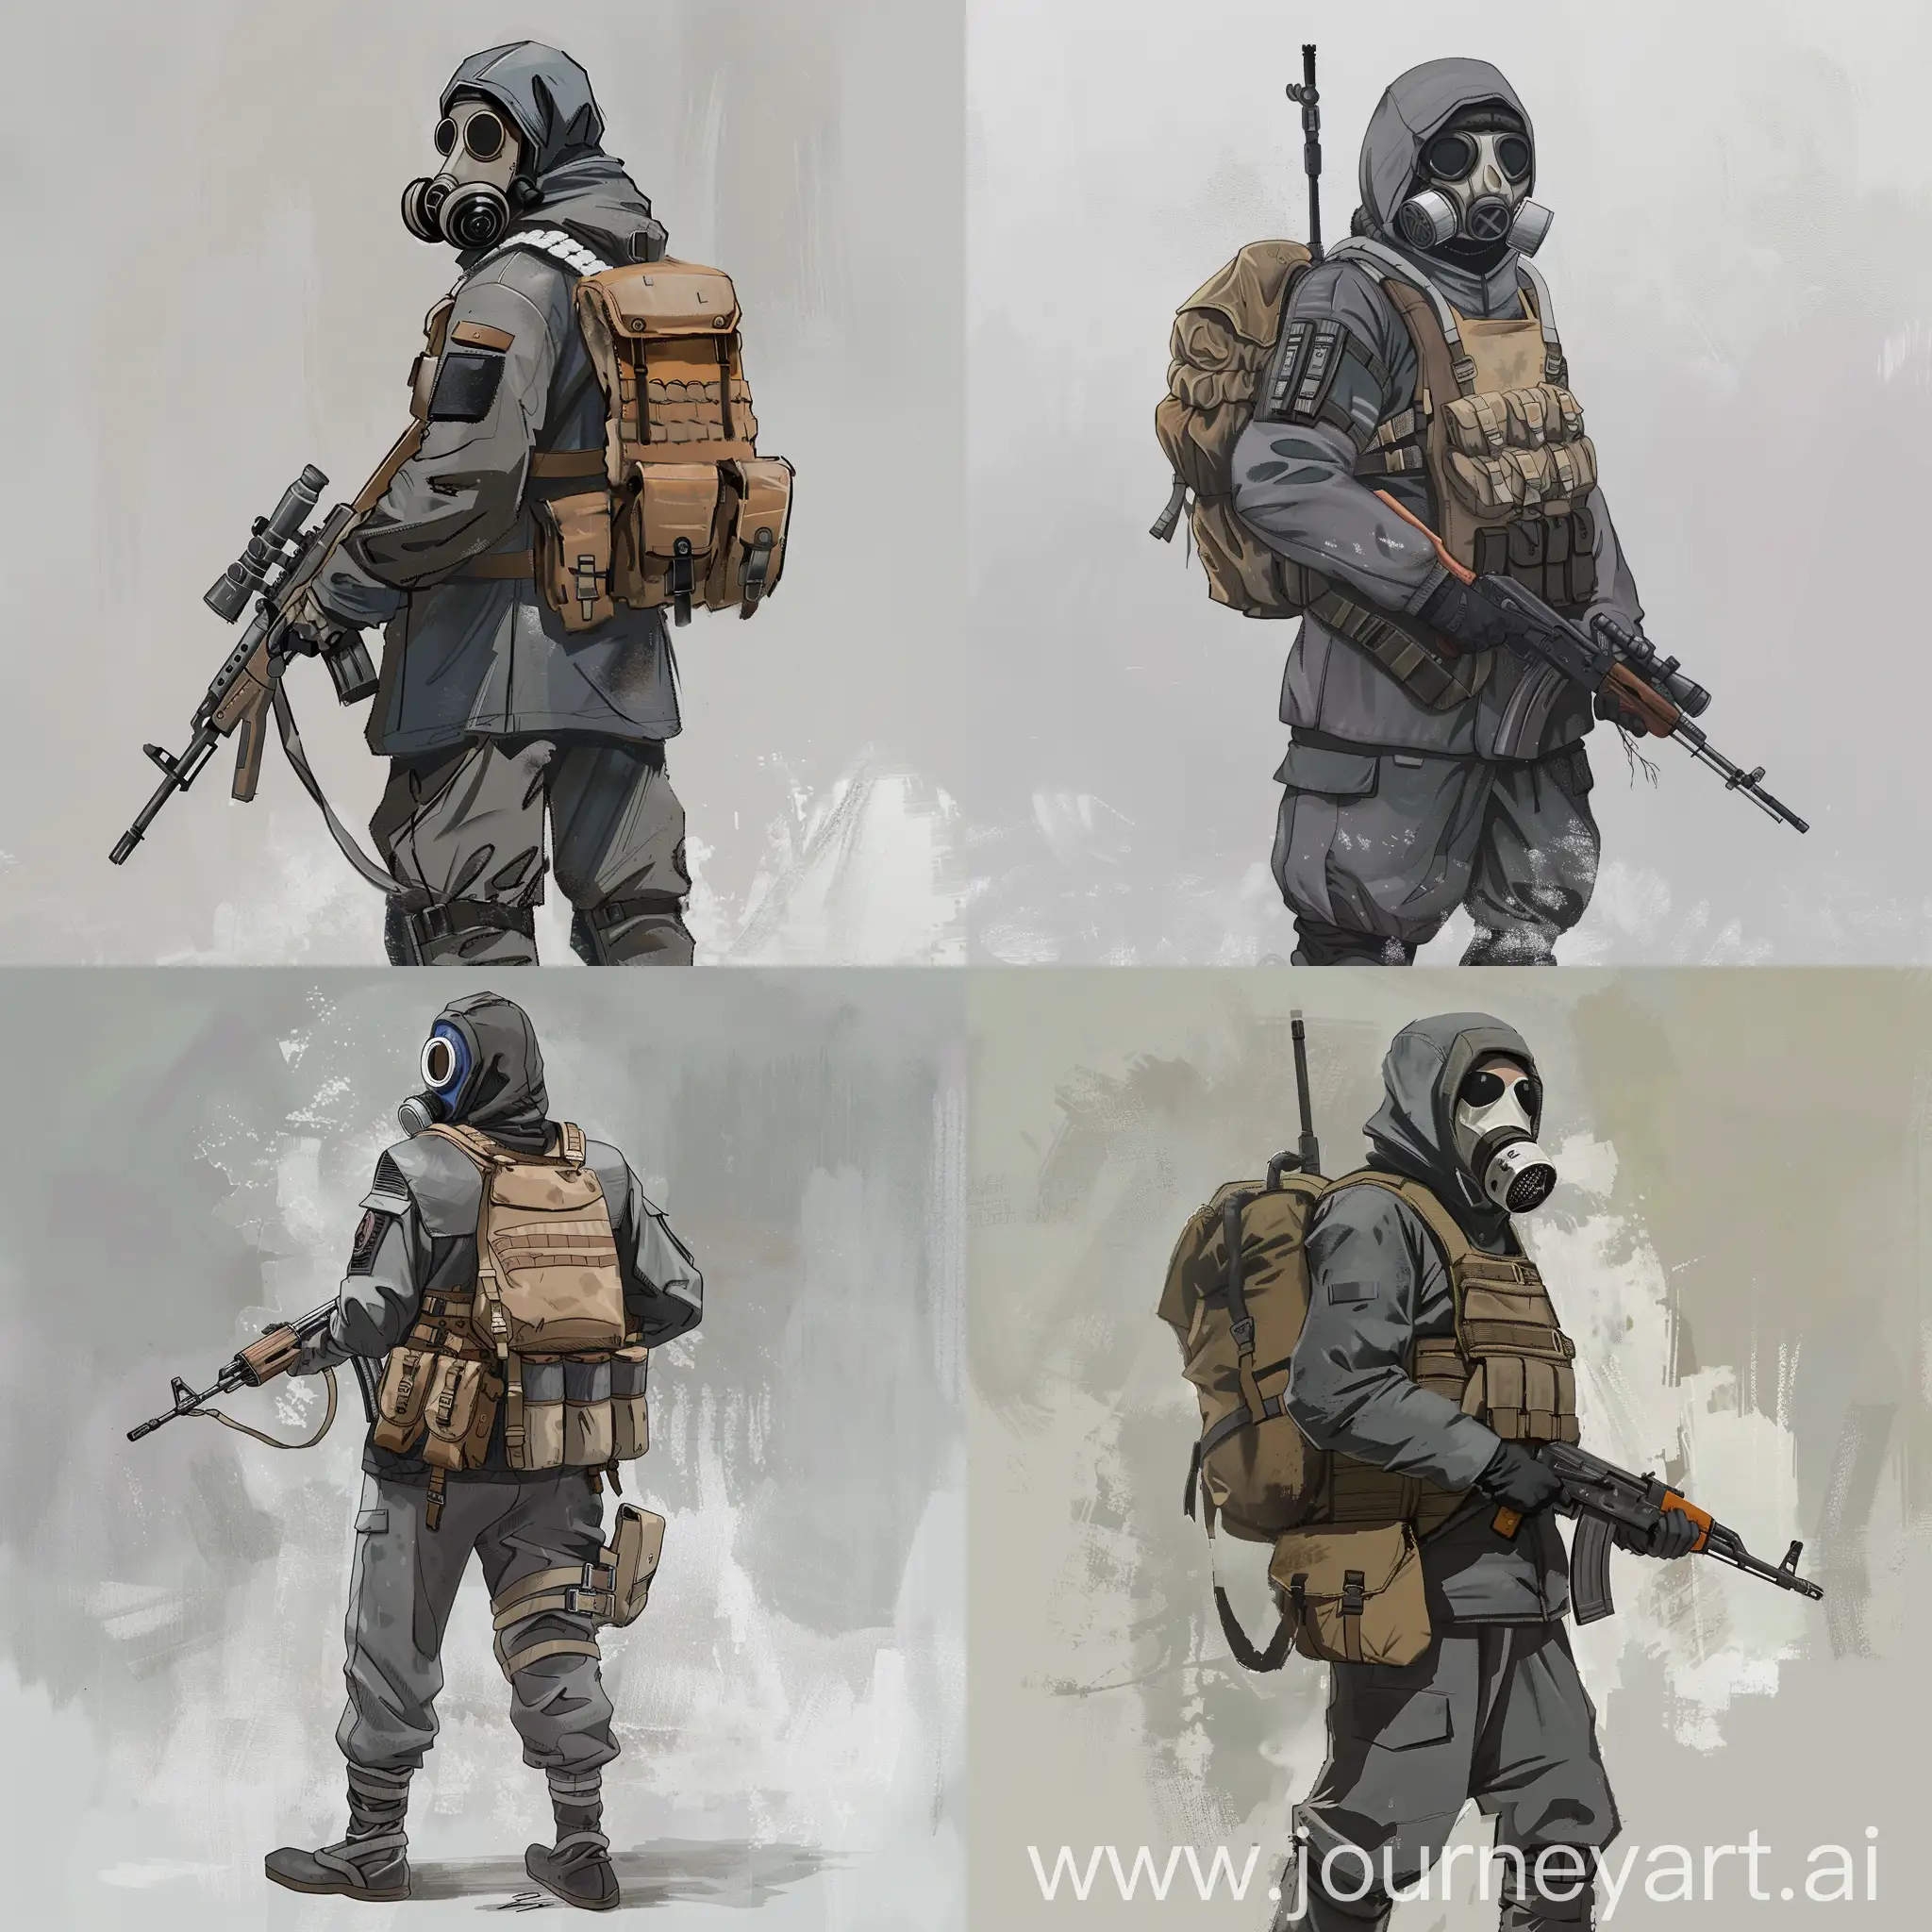 Stalker character concept art, gasmask, gray russian spetsnaz uniform, small backpack on the back, soviet army old vest, sniper rifle in the hands, digital concept art